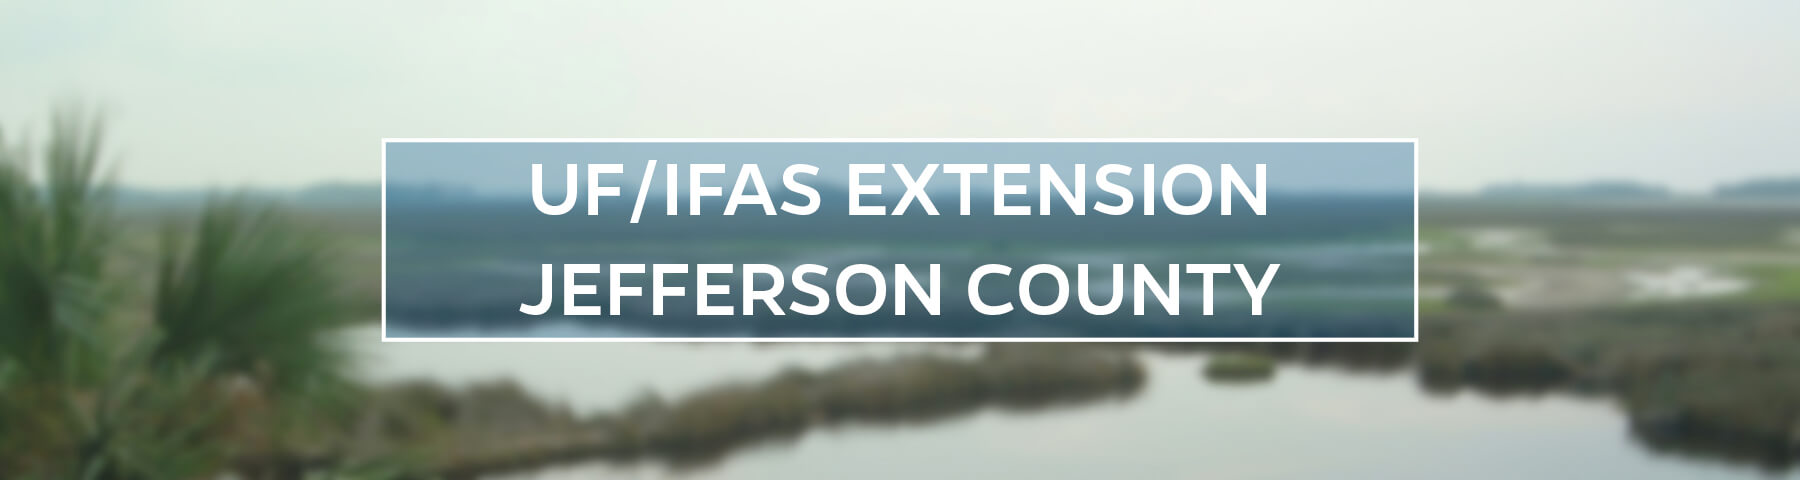 UF/IFAS Extension Jefferson County